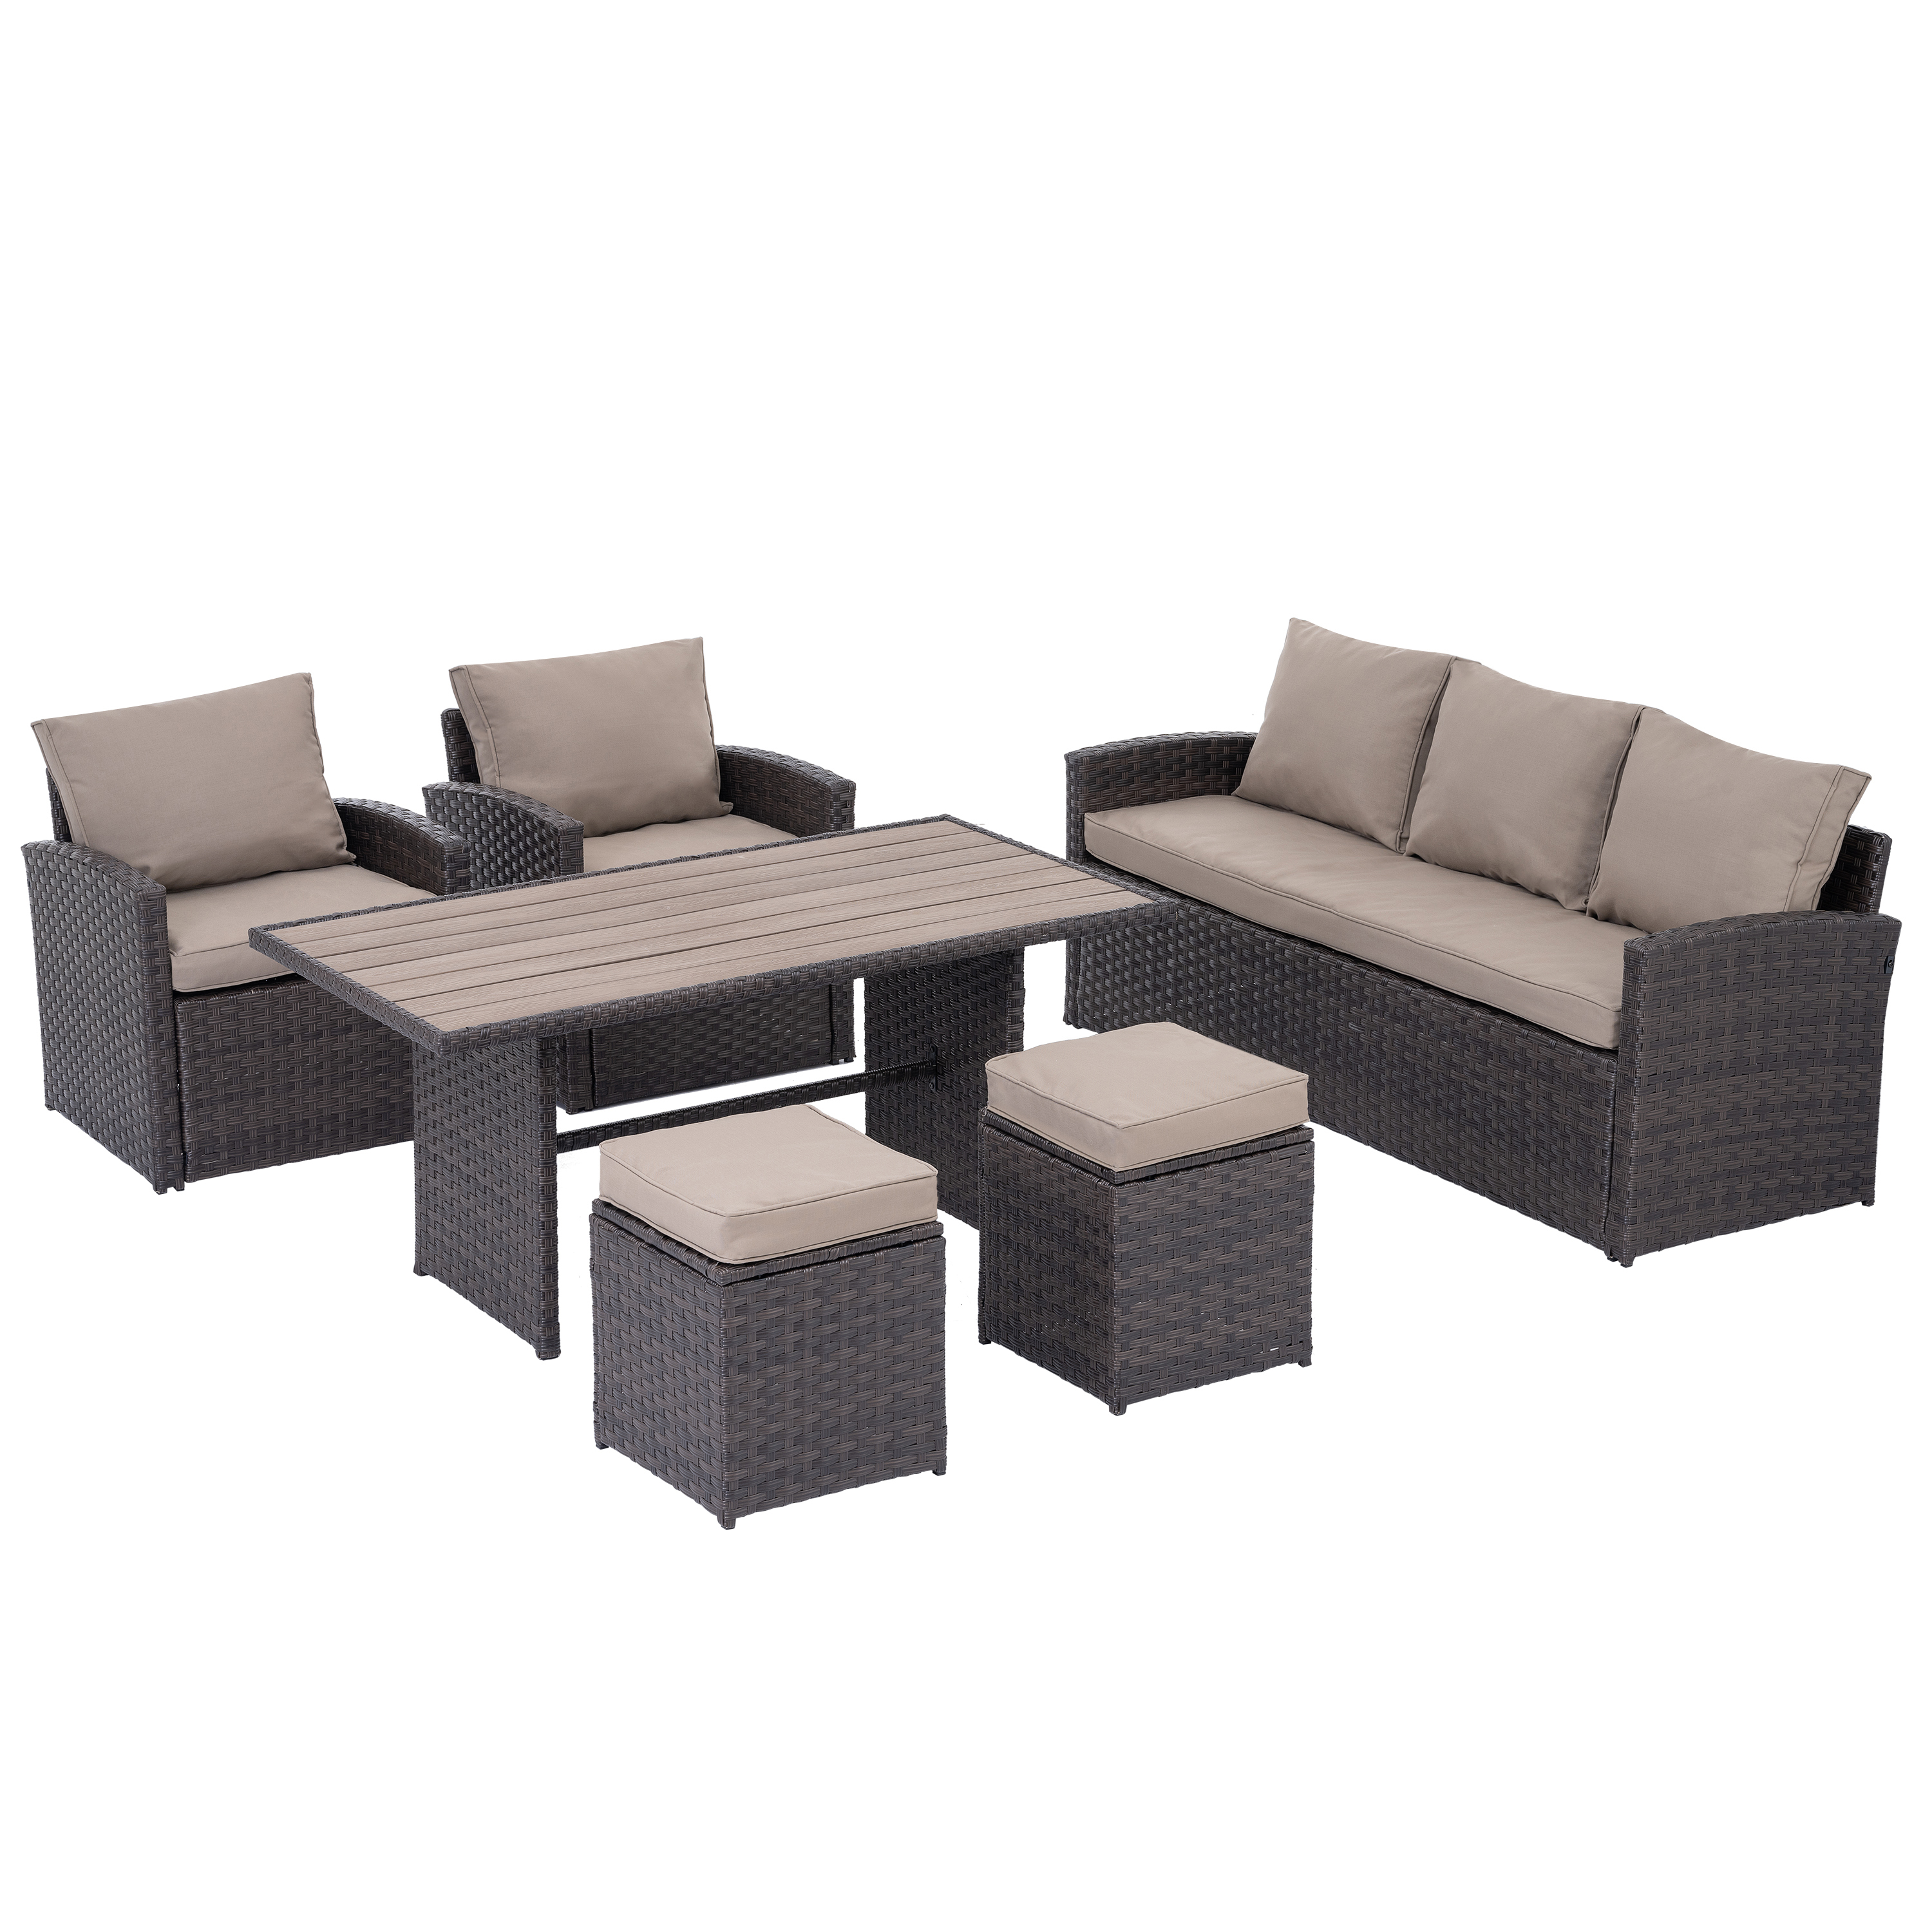 6 Piece Wicker Sectional Sofa Set, Outdoor Patio Furniture, All-Weather Rattan Garden Conversation Furniture Set, Cushioned Dining Table Set with Ottomans & Table for Patio Deck Backyard, B841 - image 4 of 9